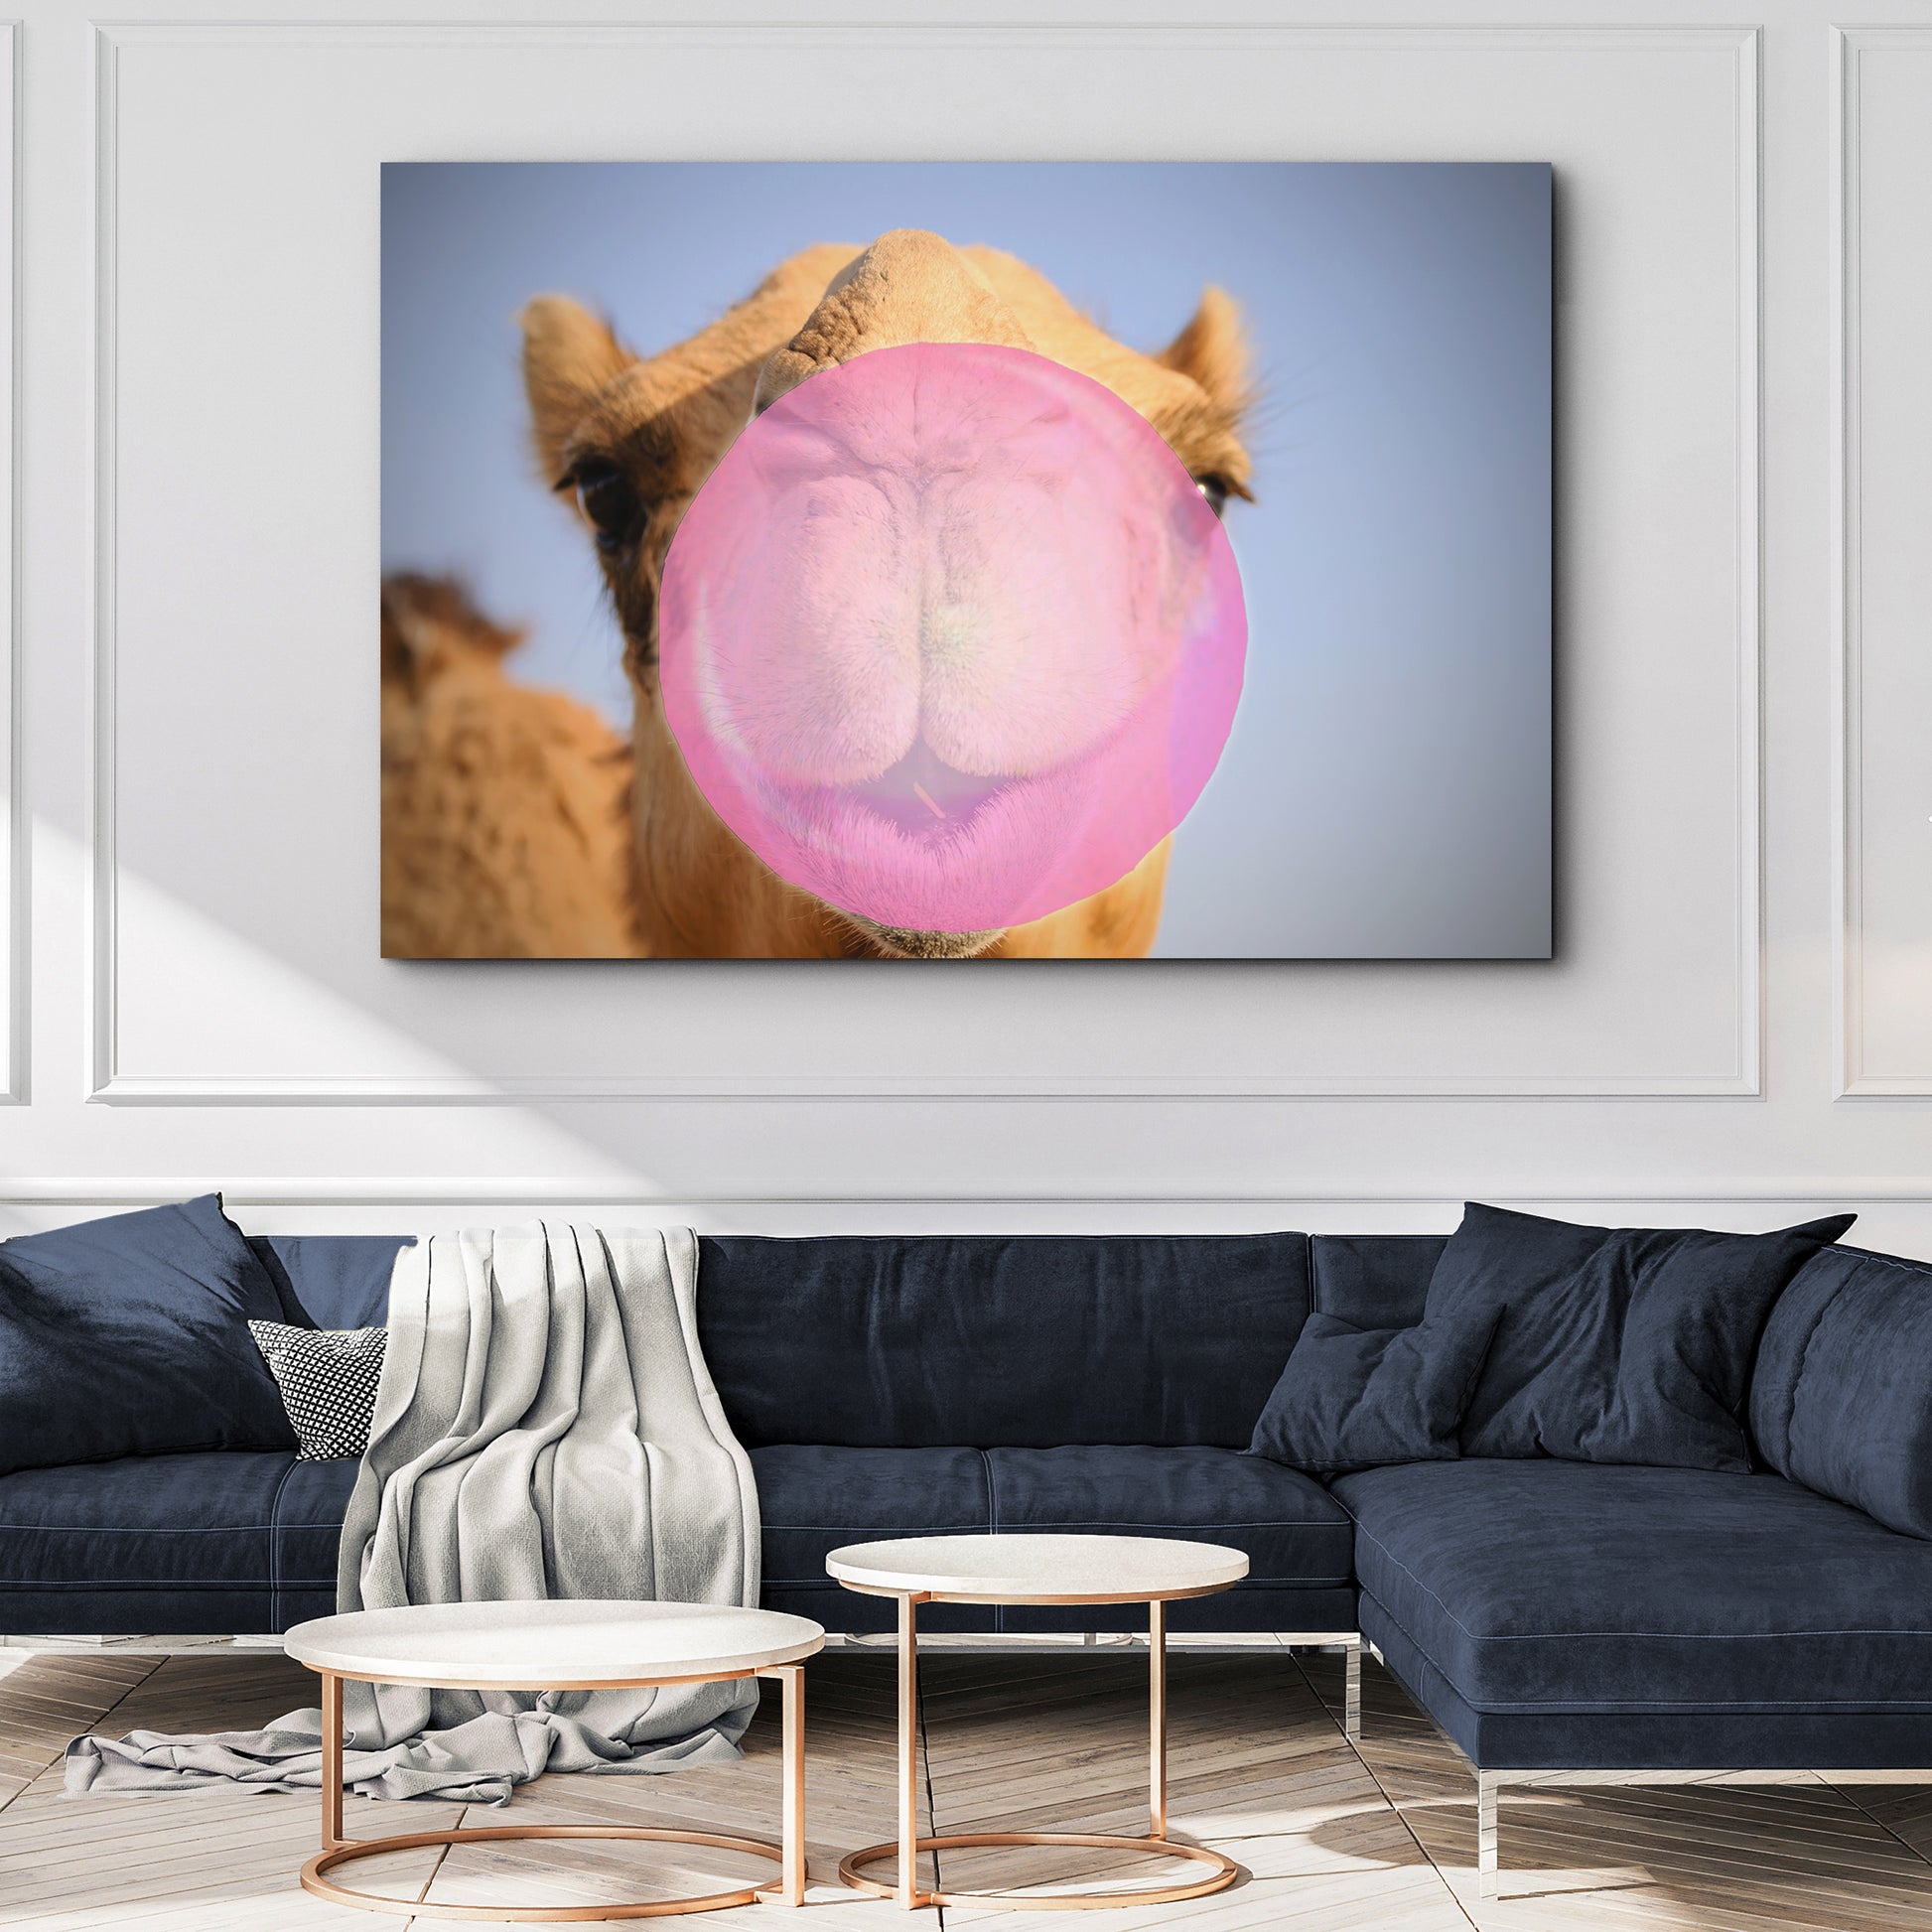 Came Bubble Gum Pop Canvas Wall Art Style 2 - Image by Tailored Canvases